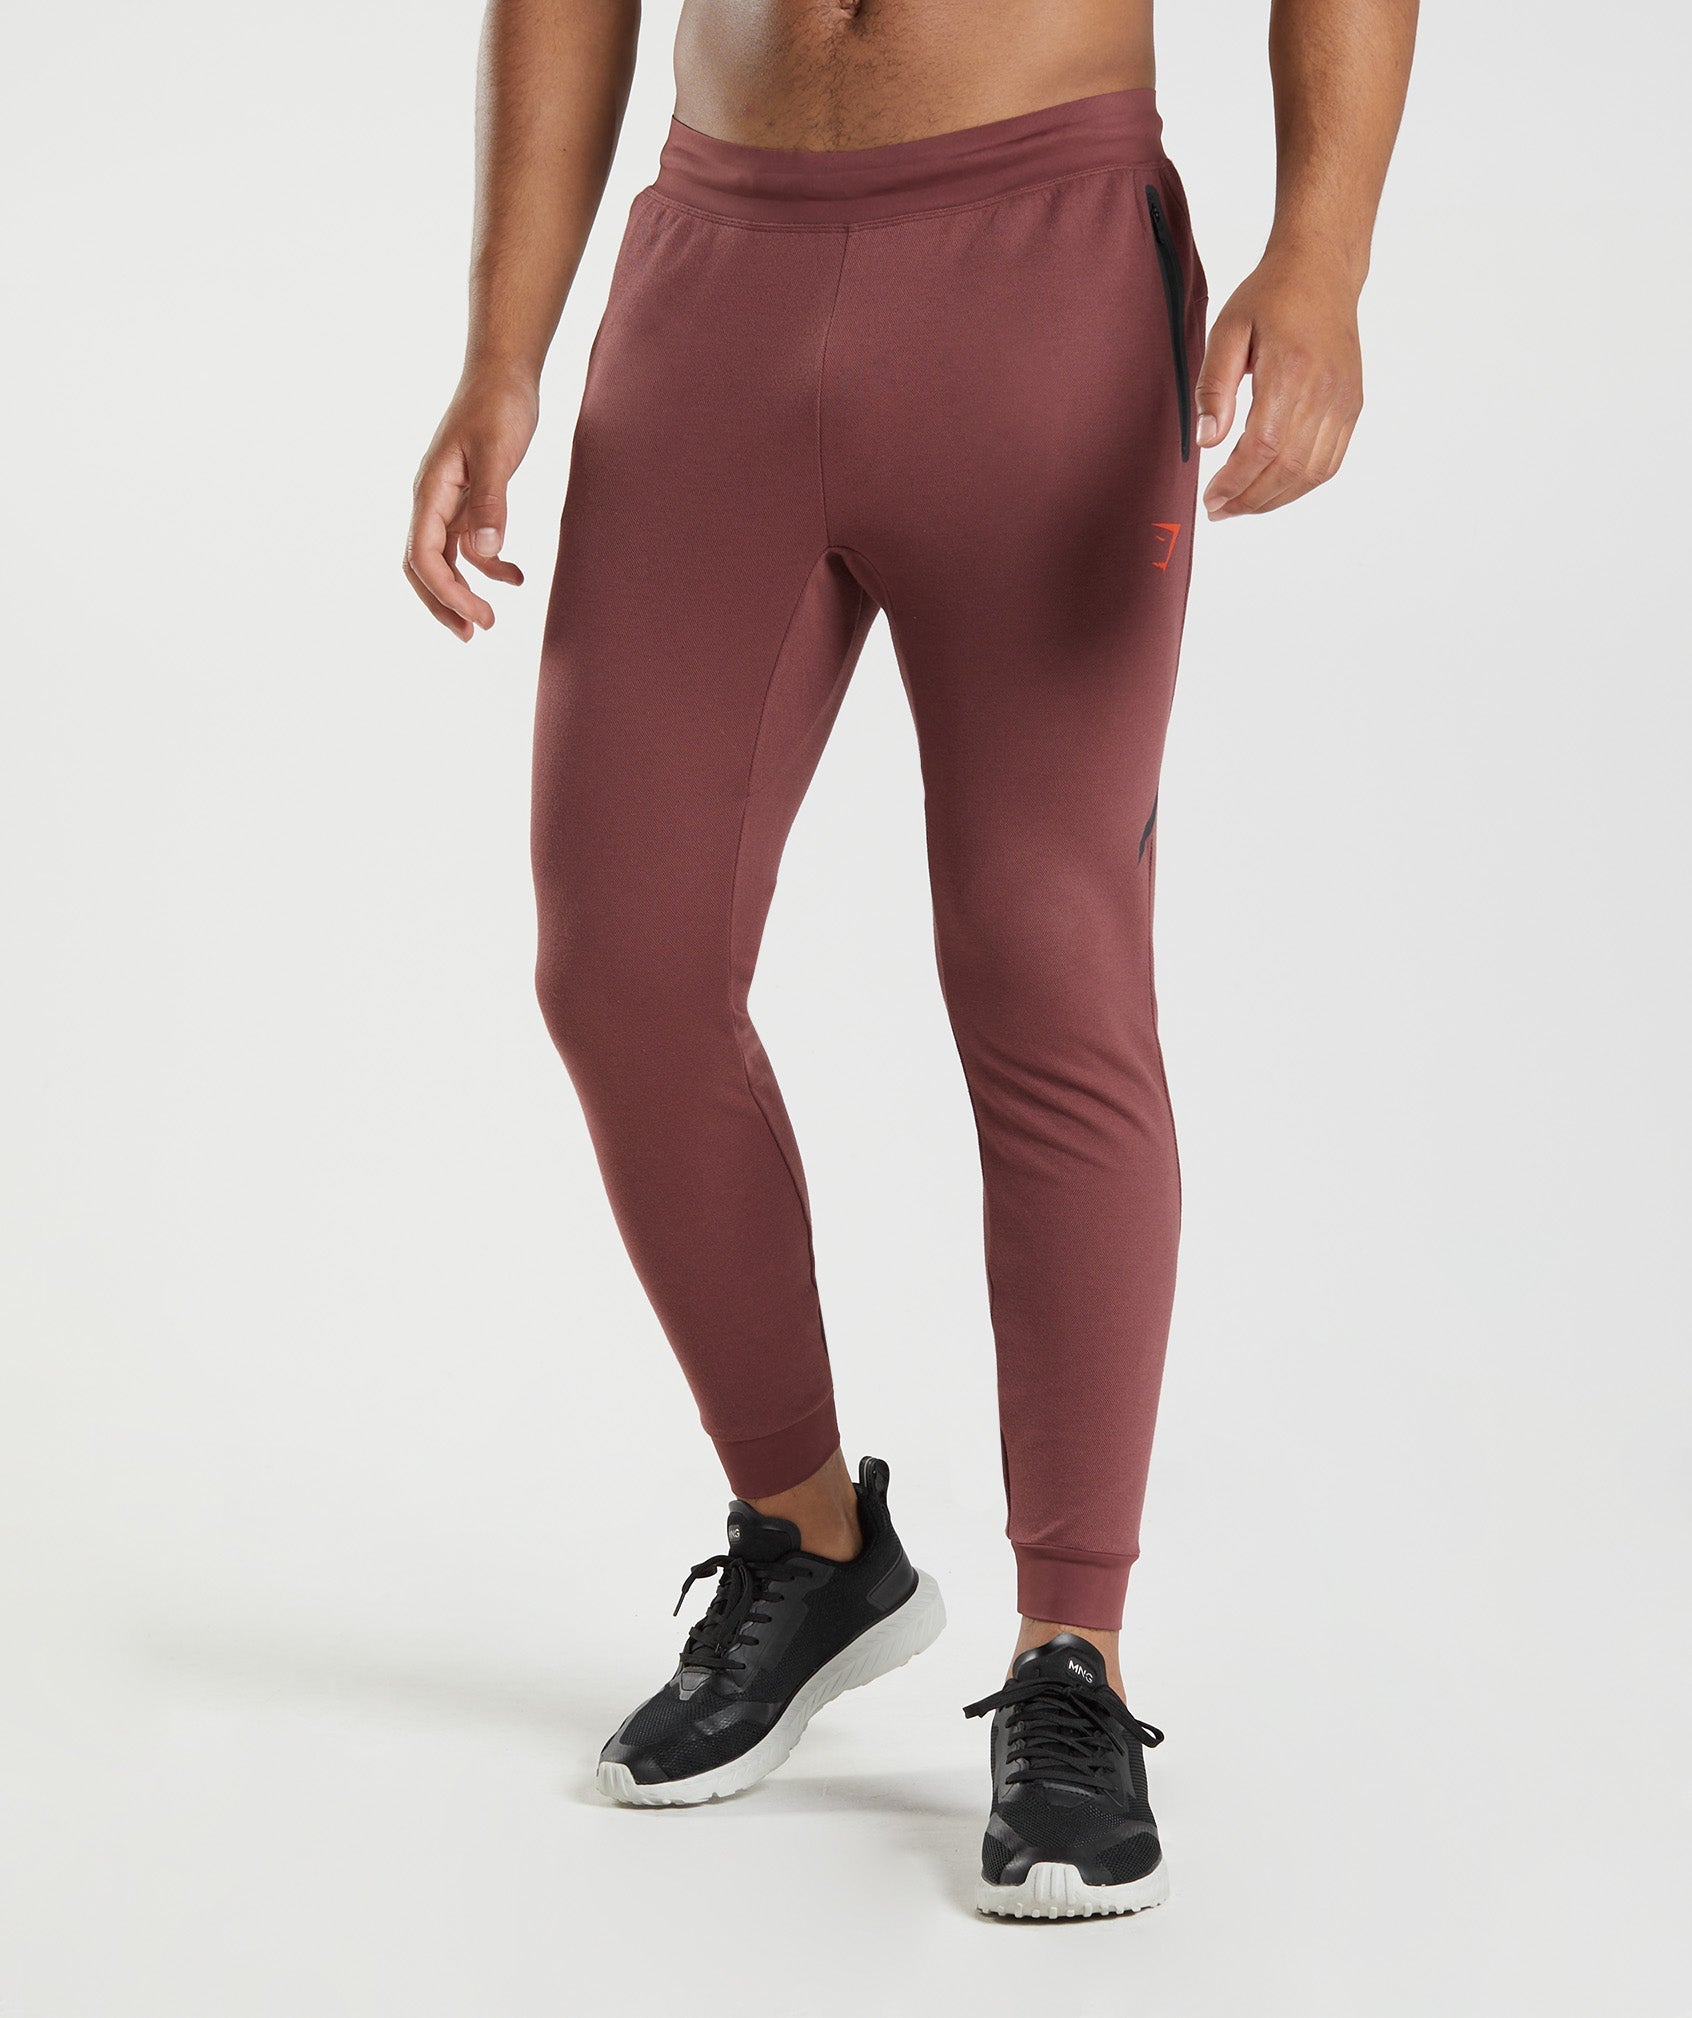 Apex Technical Joggers in Cherry Brown is out of stock